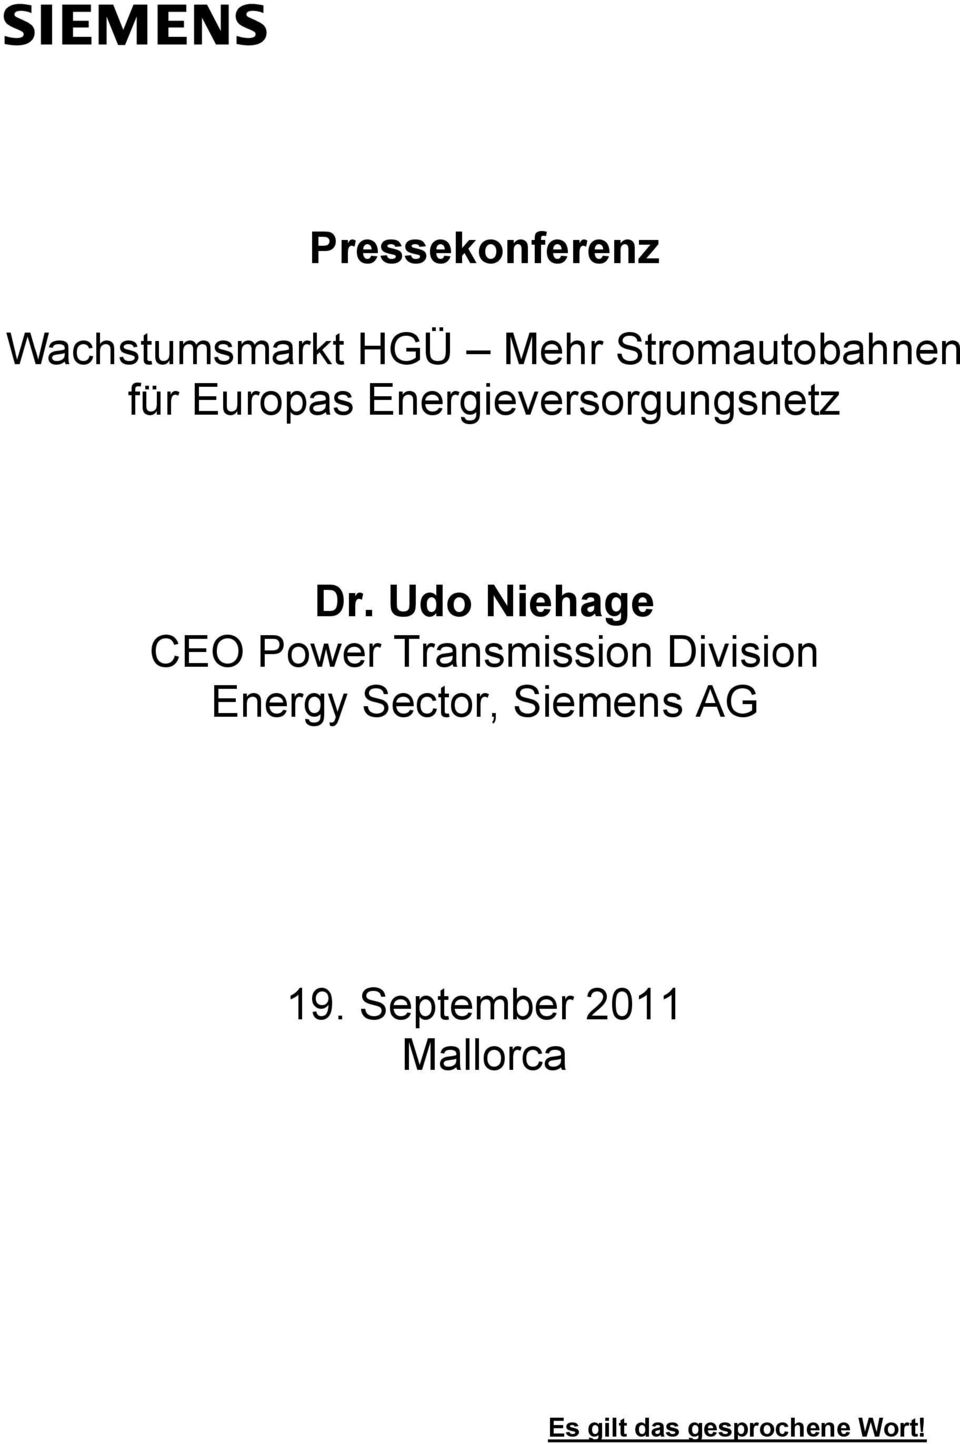 Udo Niehage CEO Power Transmission Division Energy